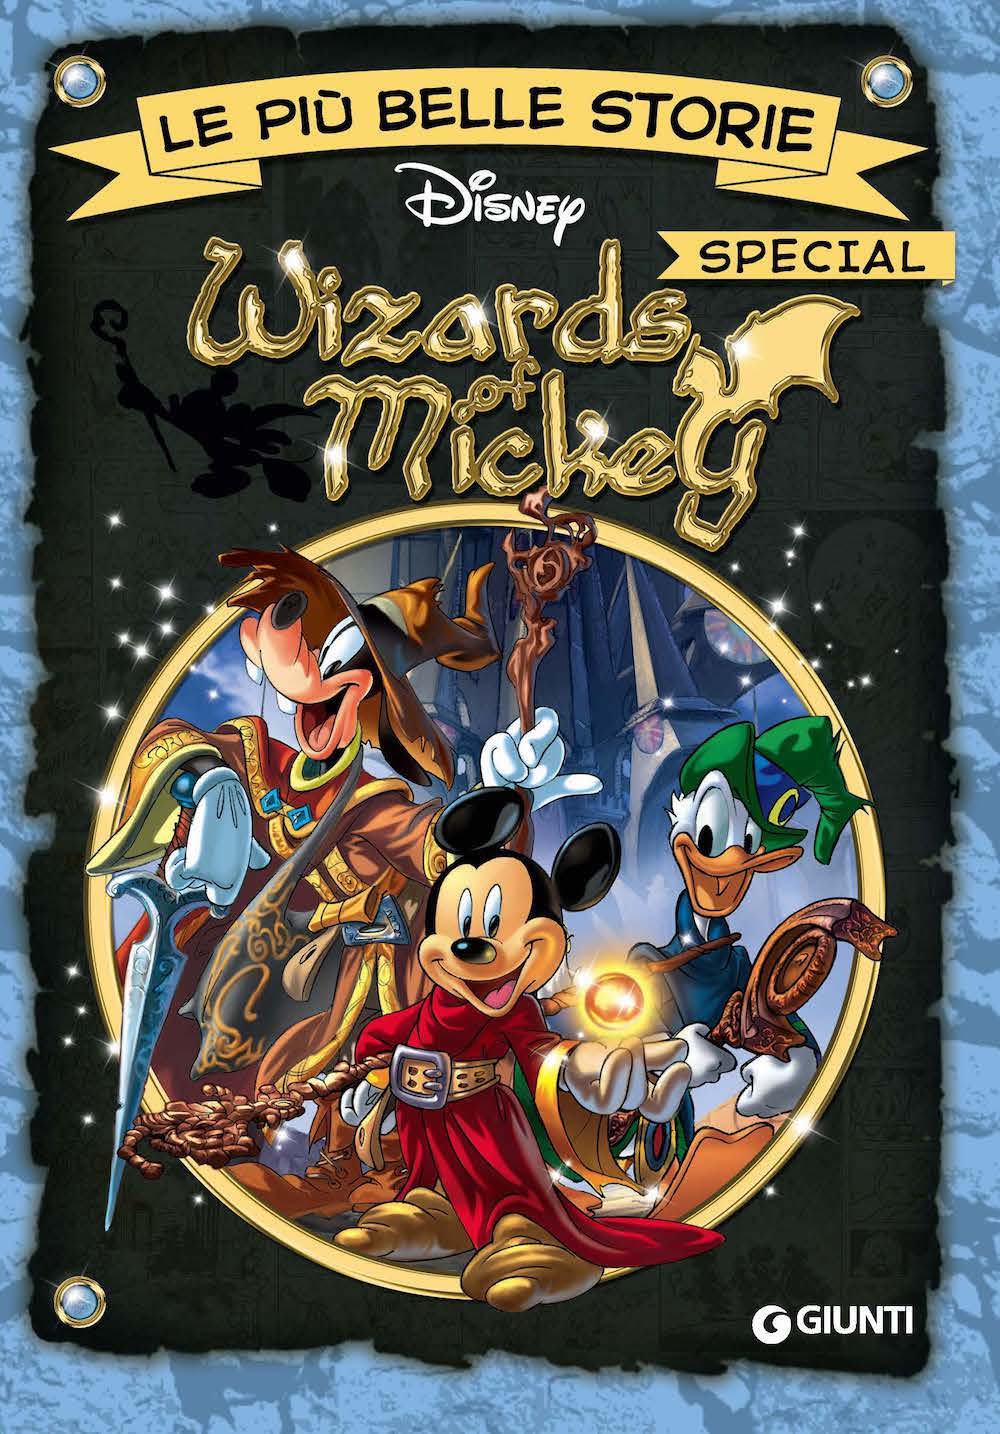 Le più belle storie special - Wizards of Mickey